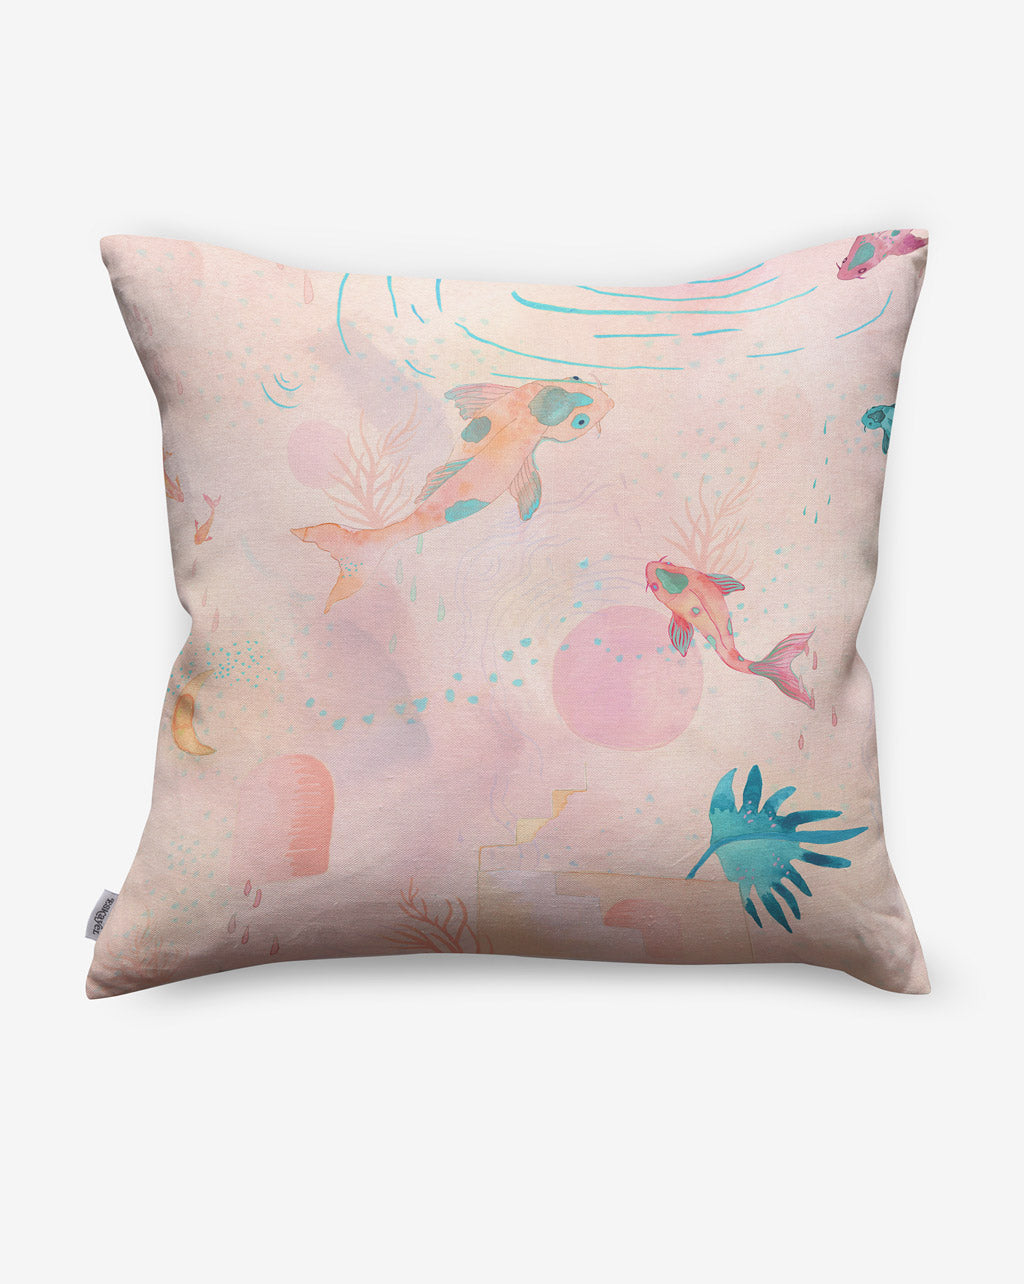 Water Signs Outdoor Pillow Multi showcases the beauty of mermaids and fishes